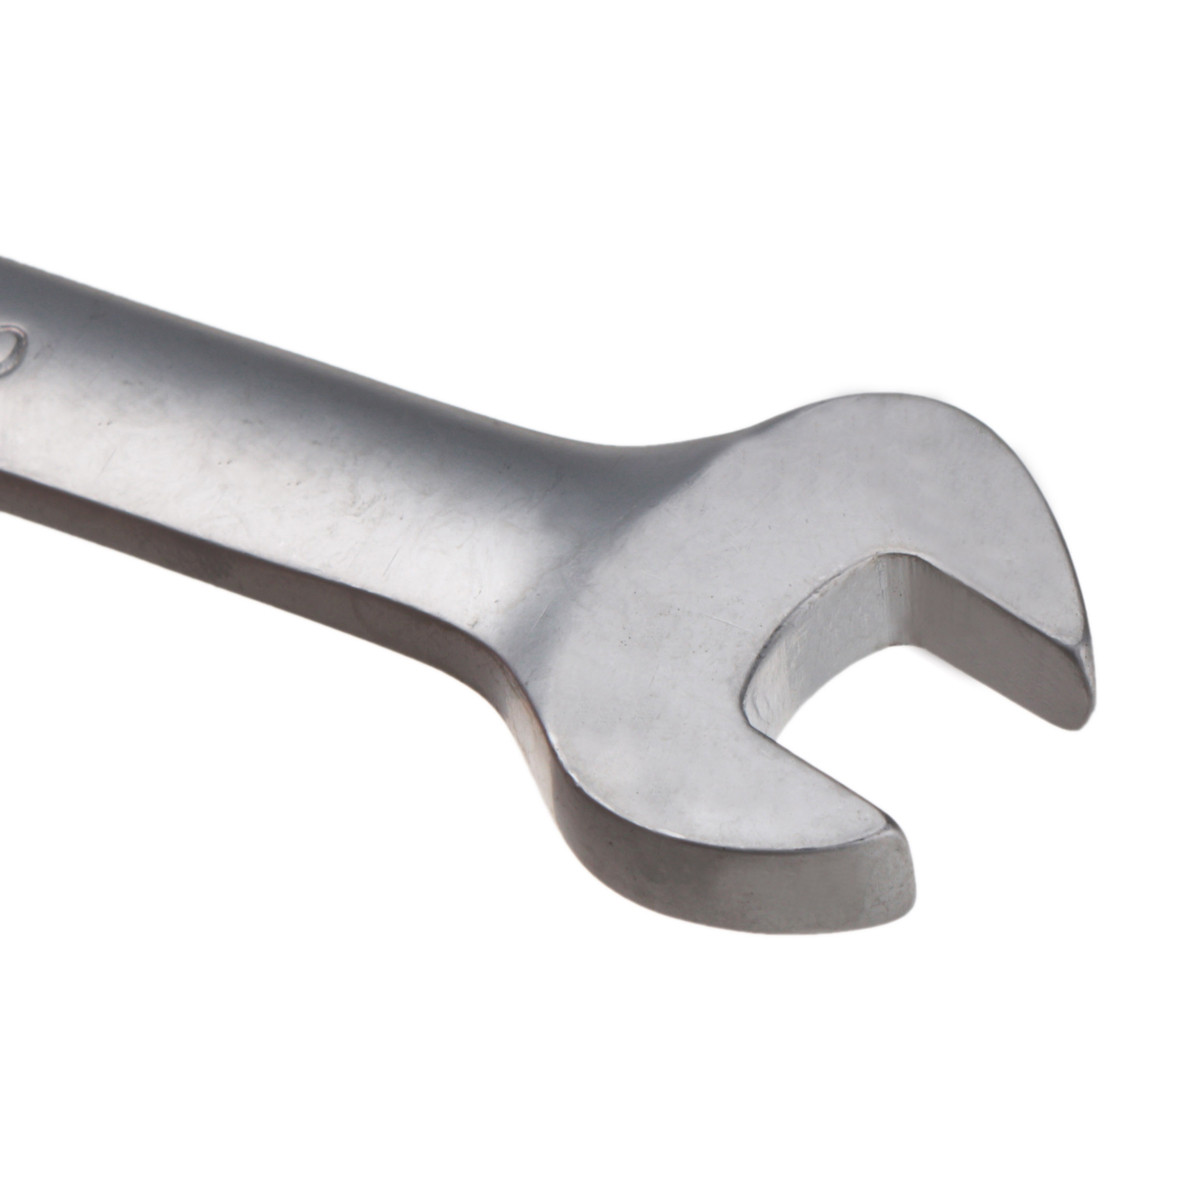 10mm-Flexible-Head-Wrench-Ratchet-Metric-Spanner-Open-End-And-Ring-Wrenches-Tool-979974